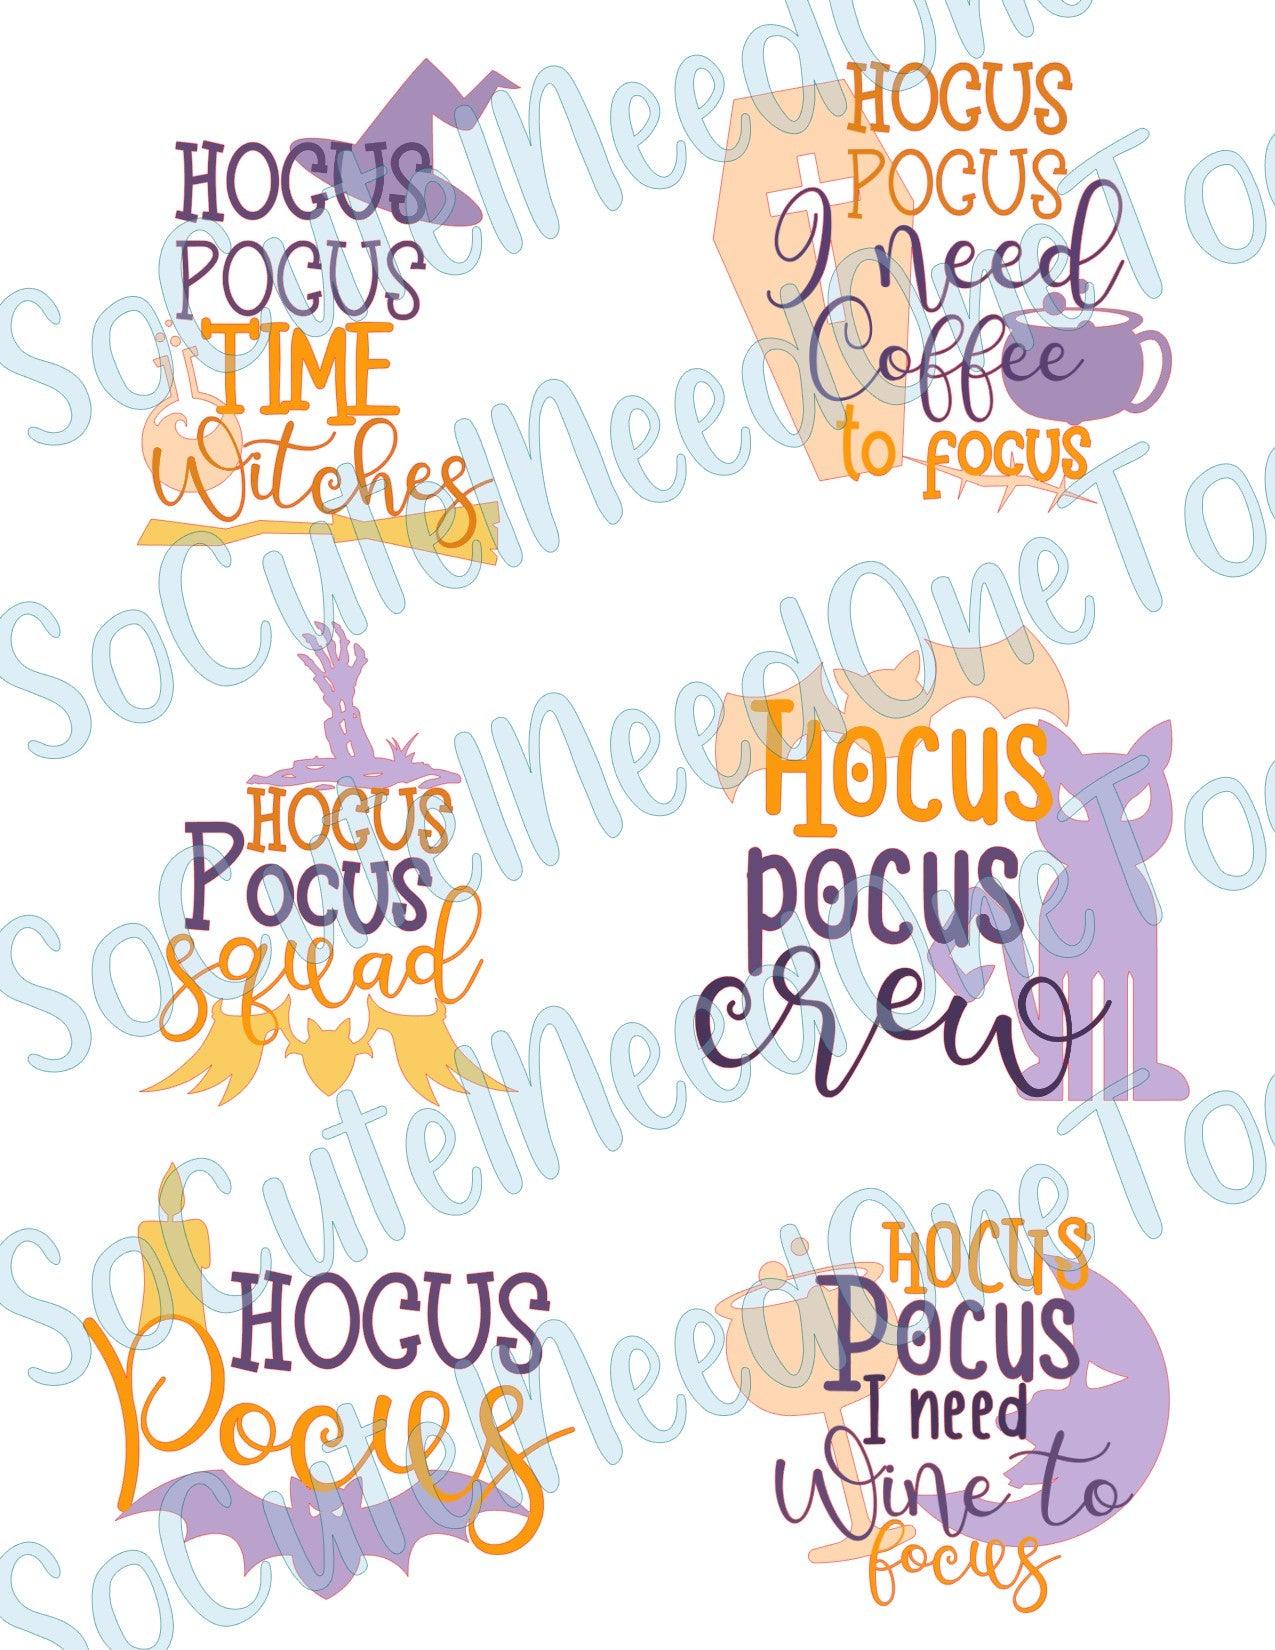 Hocus Pocus #2 on Clear/White Waterslide Paper Ready To Use - SoCuteINeedOneToo